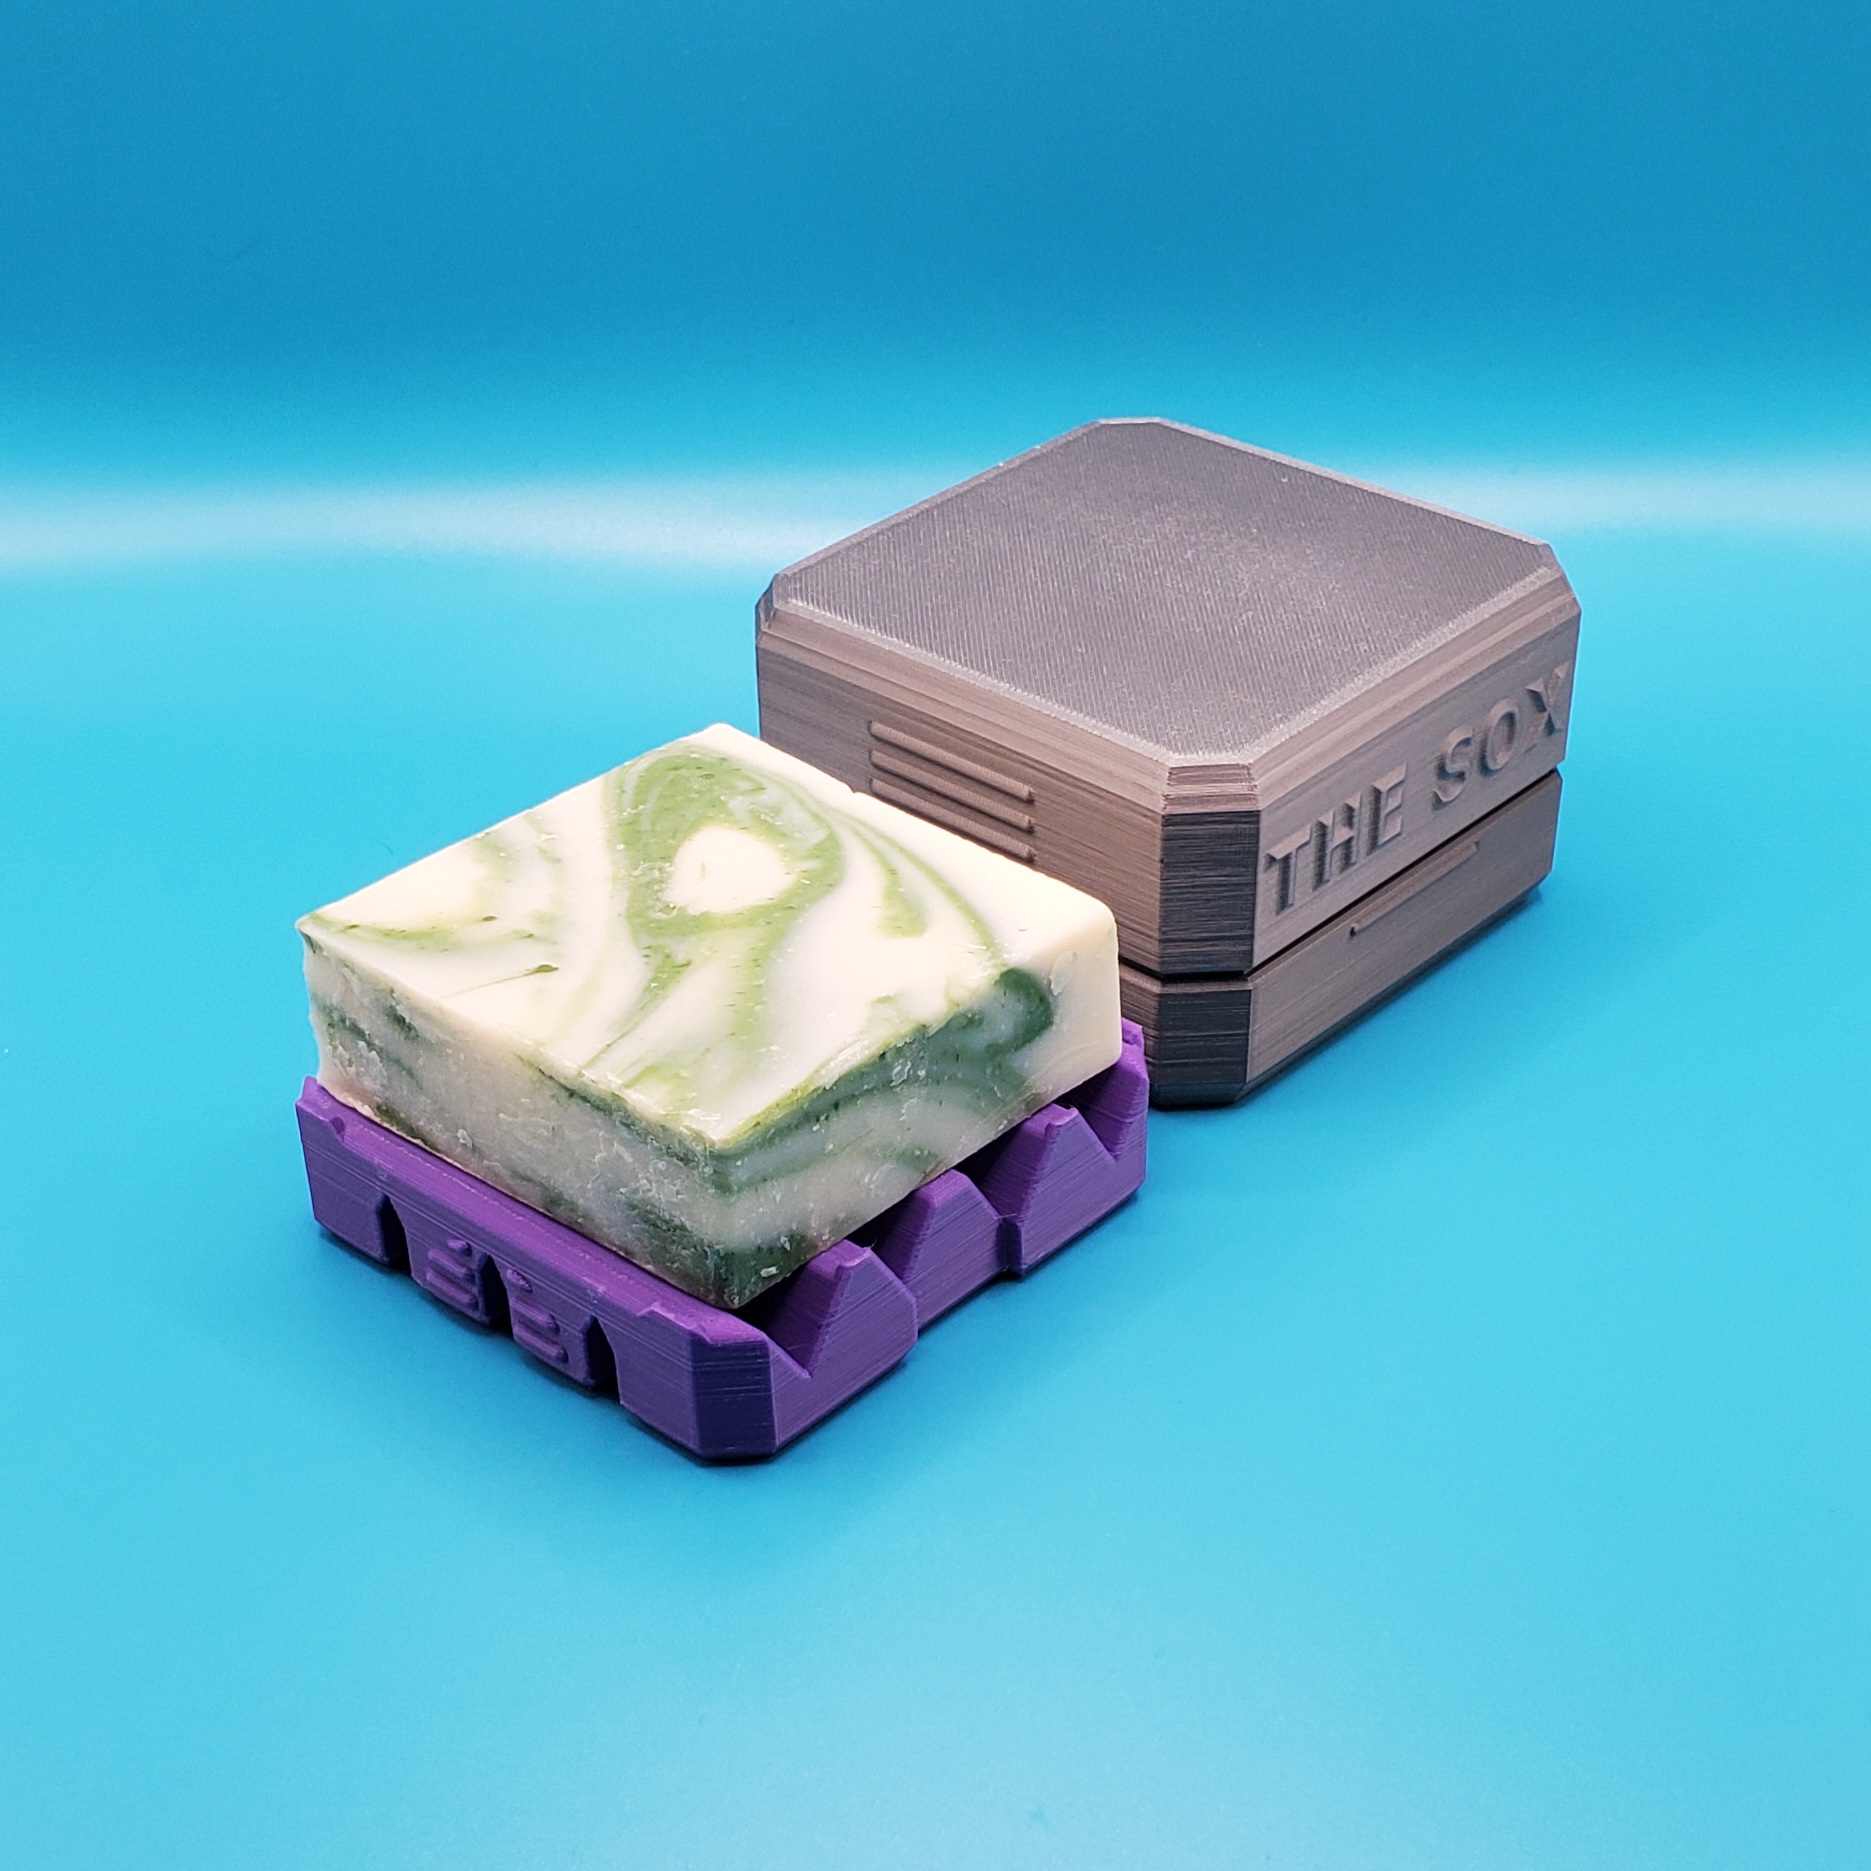 Awesome  find! Soap saver/travel case combo. : r/DrSquatch